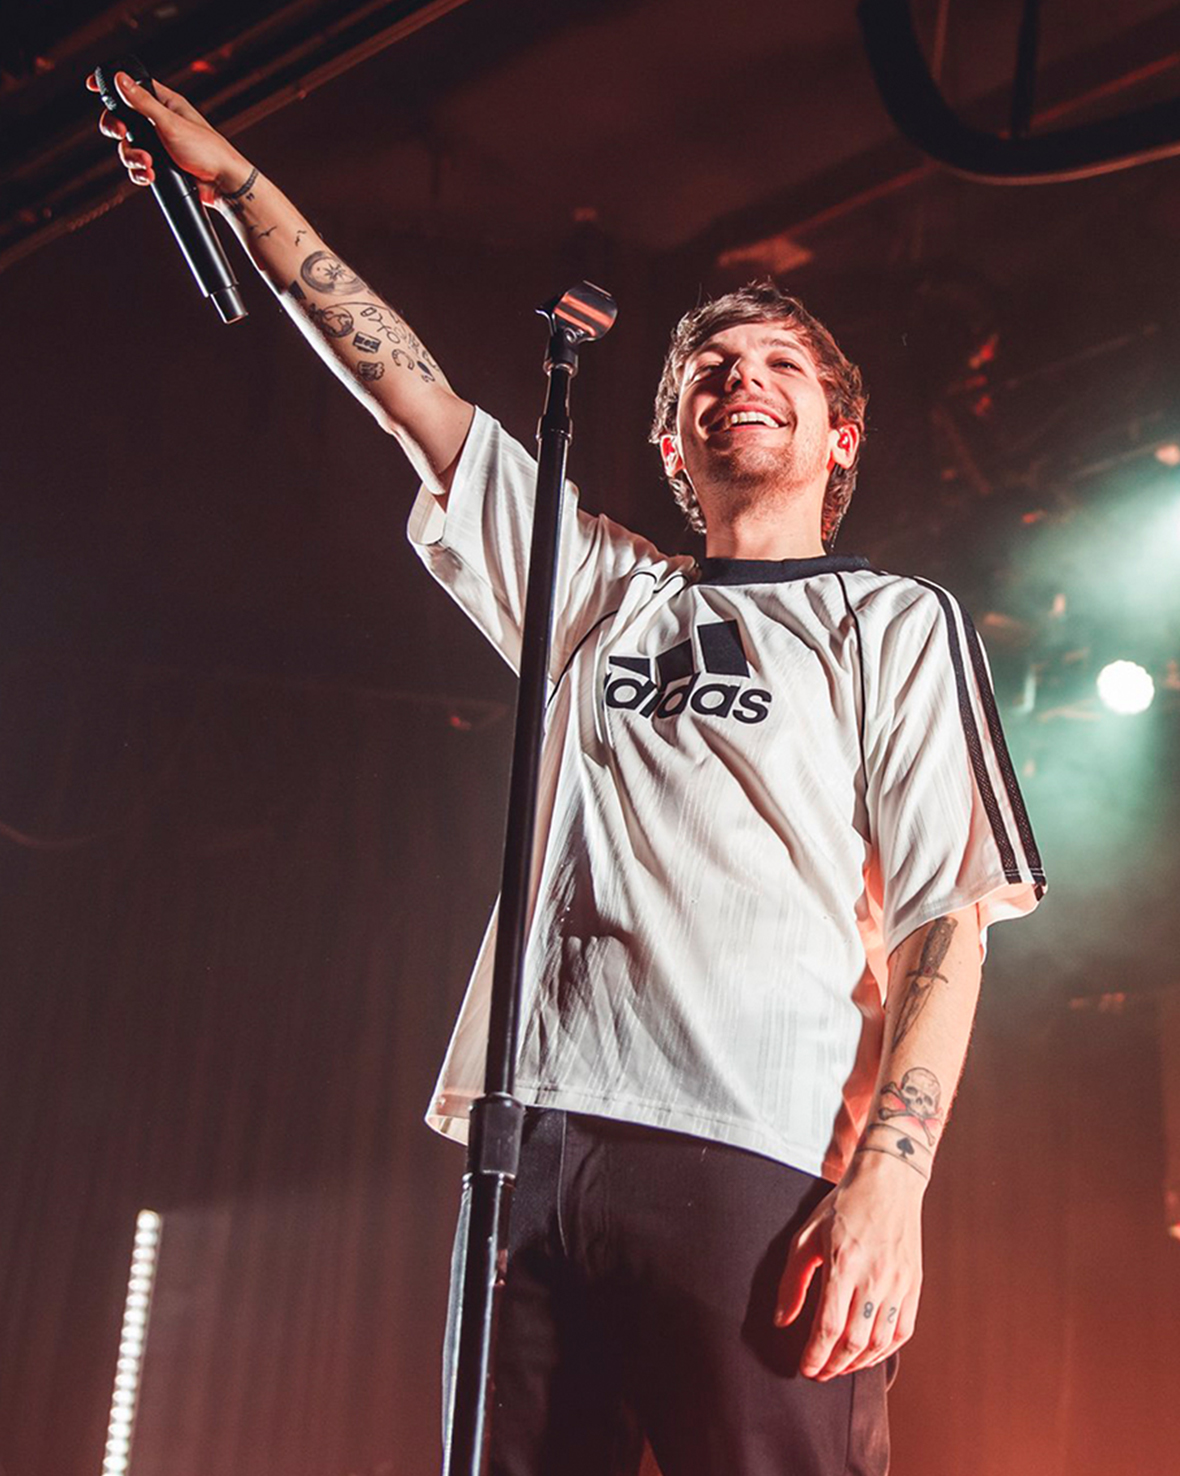 Louis Tomlinson's 'Back to You' Performance on Teen Choice Awards: Watch